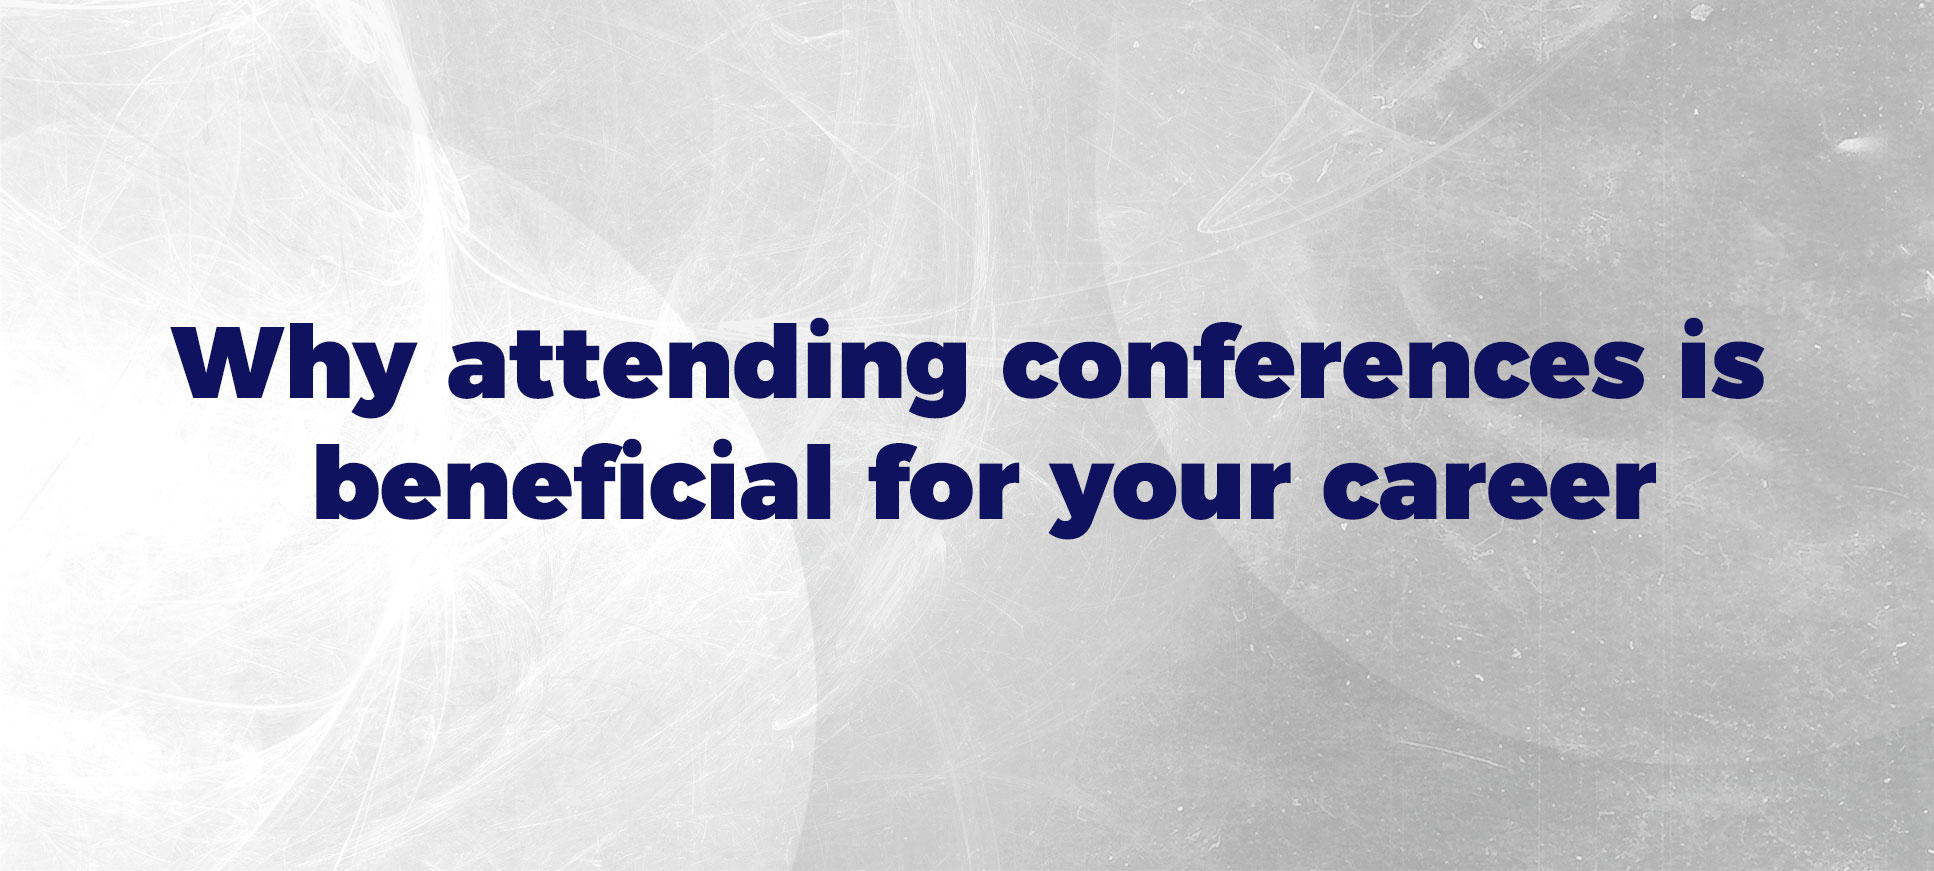 Why attending conferences is beneficial for your career